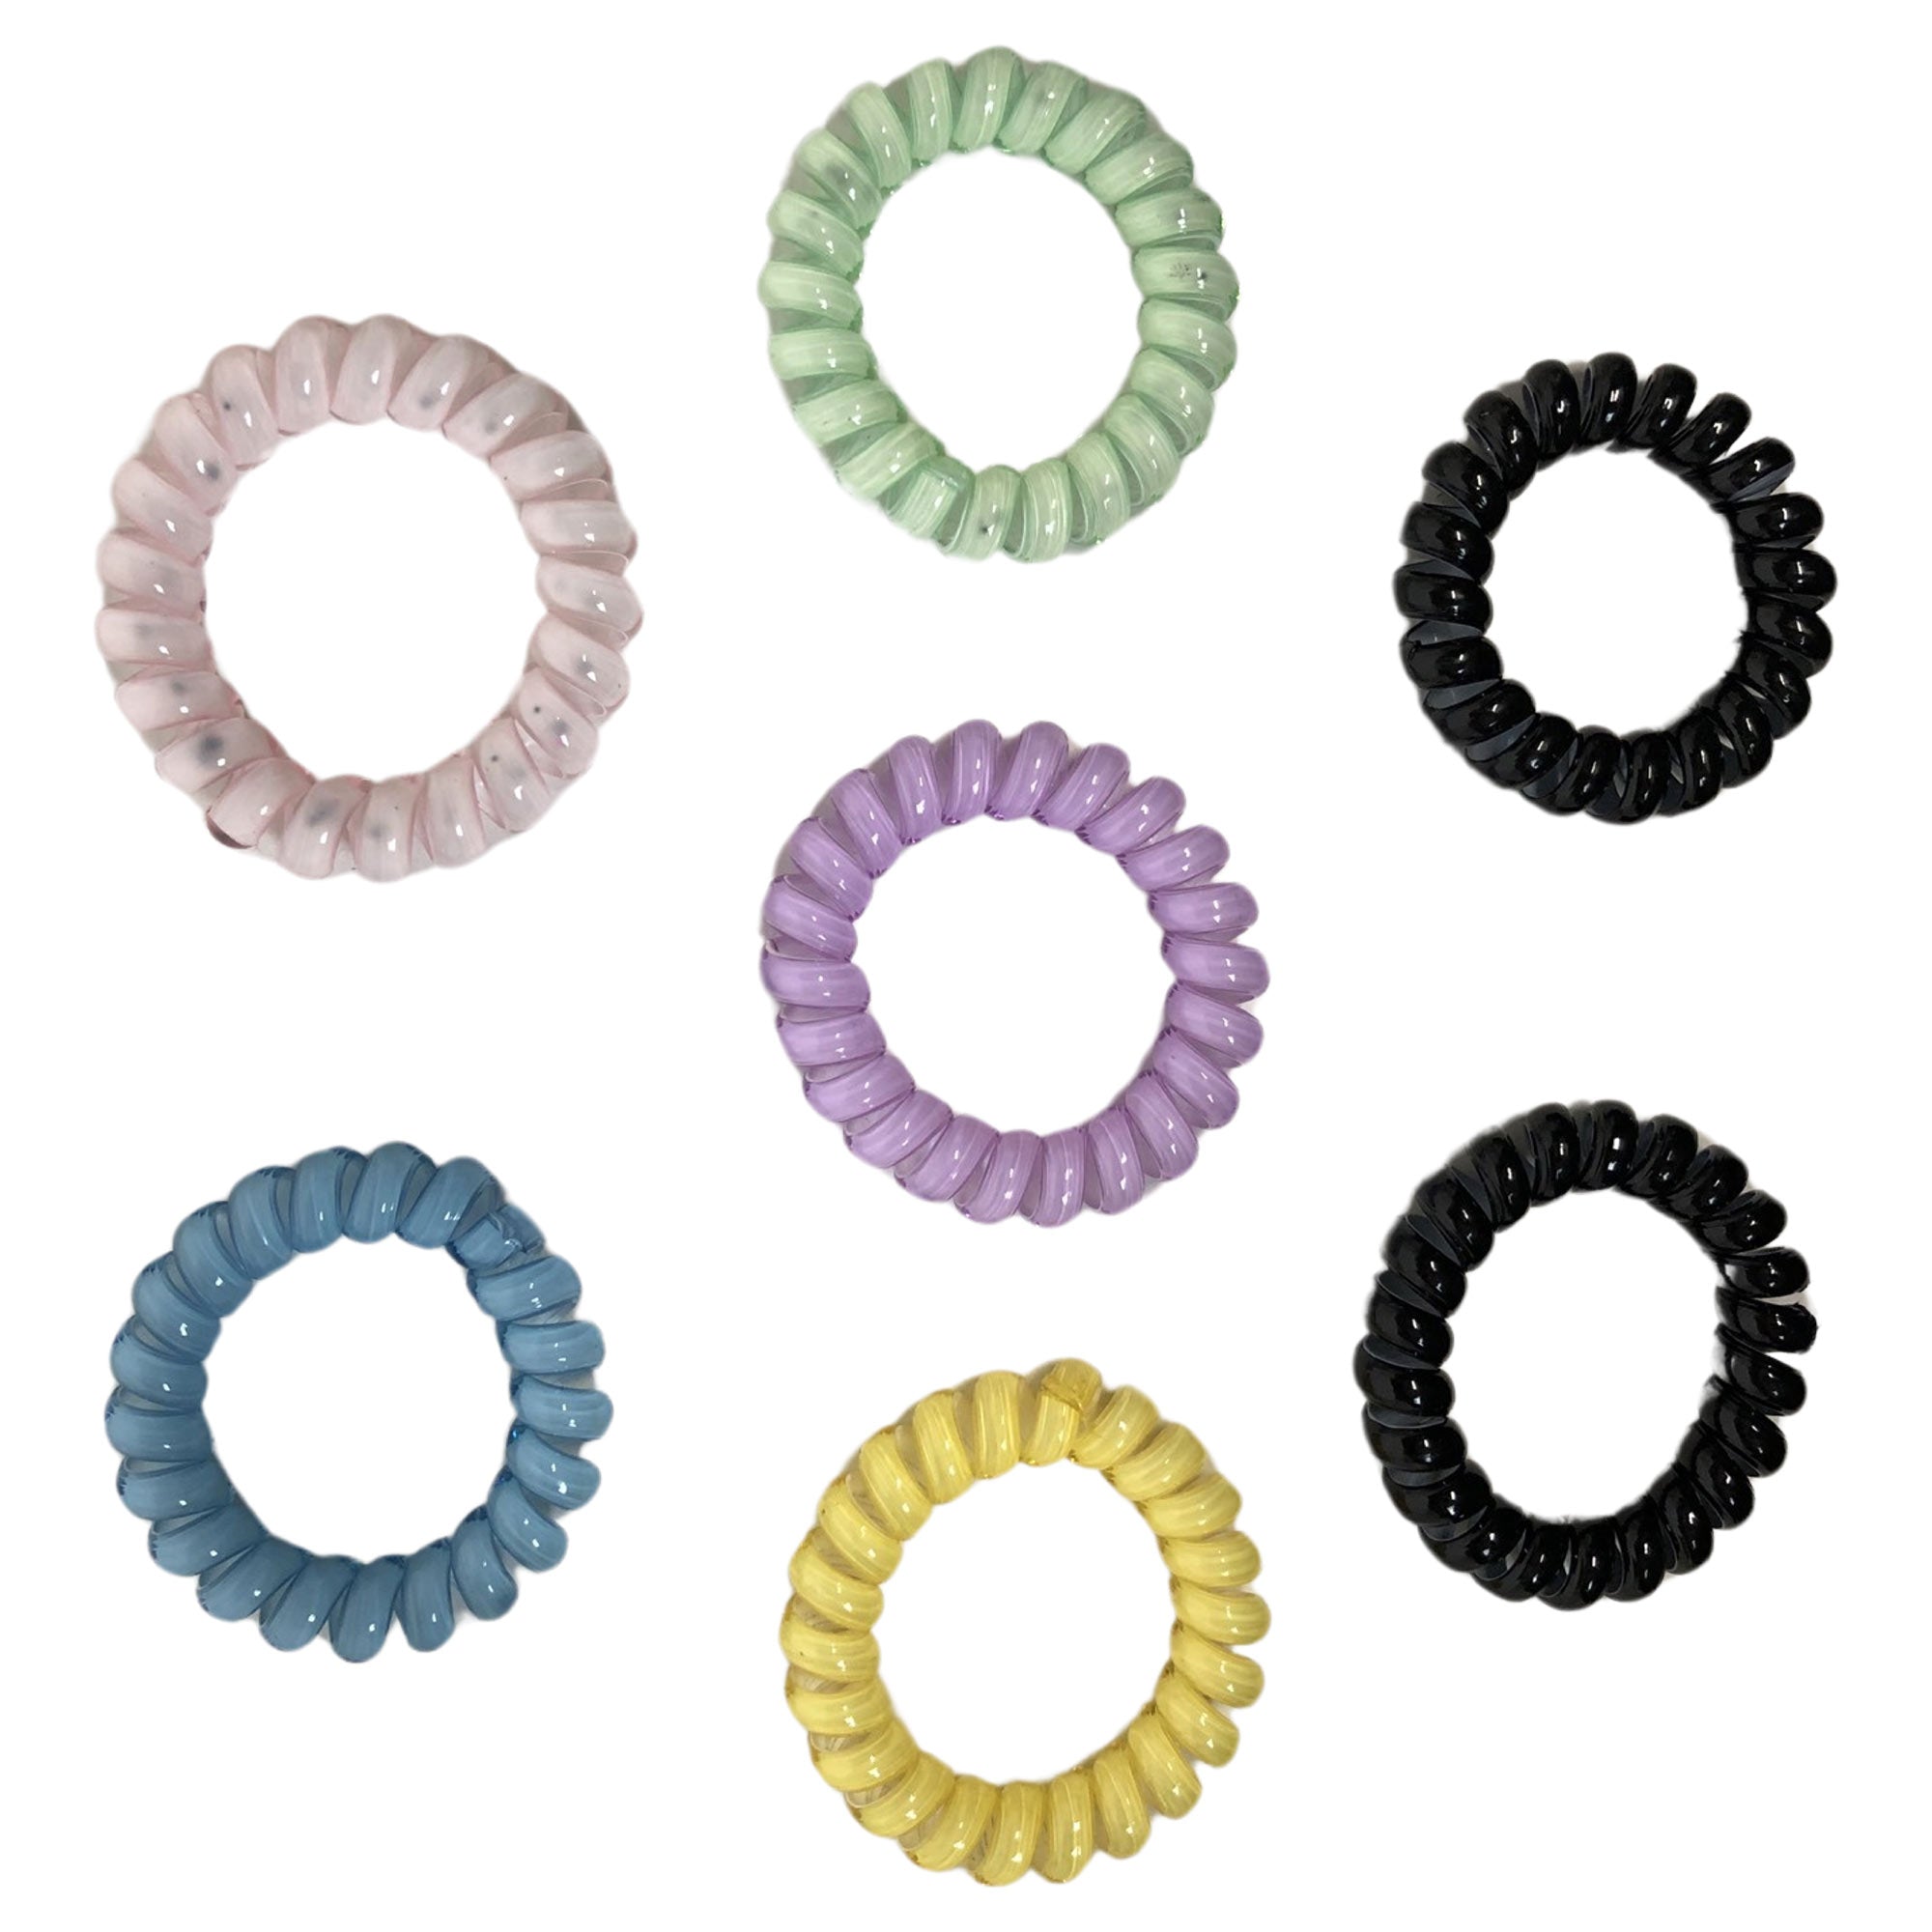 CLEARANCE CORDED HAIR TIES - 7 IN A CAN (CASE OF 36 - $2.00 / PIECE)  Wholesale Hair Ties in Assorted Colors SKU: 84113-36